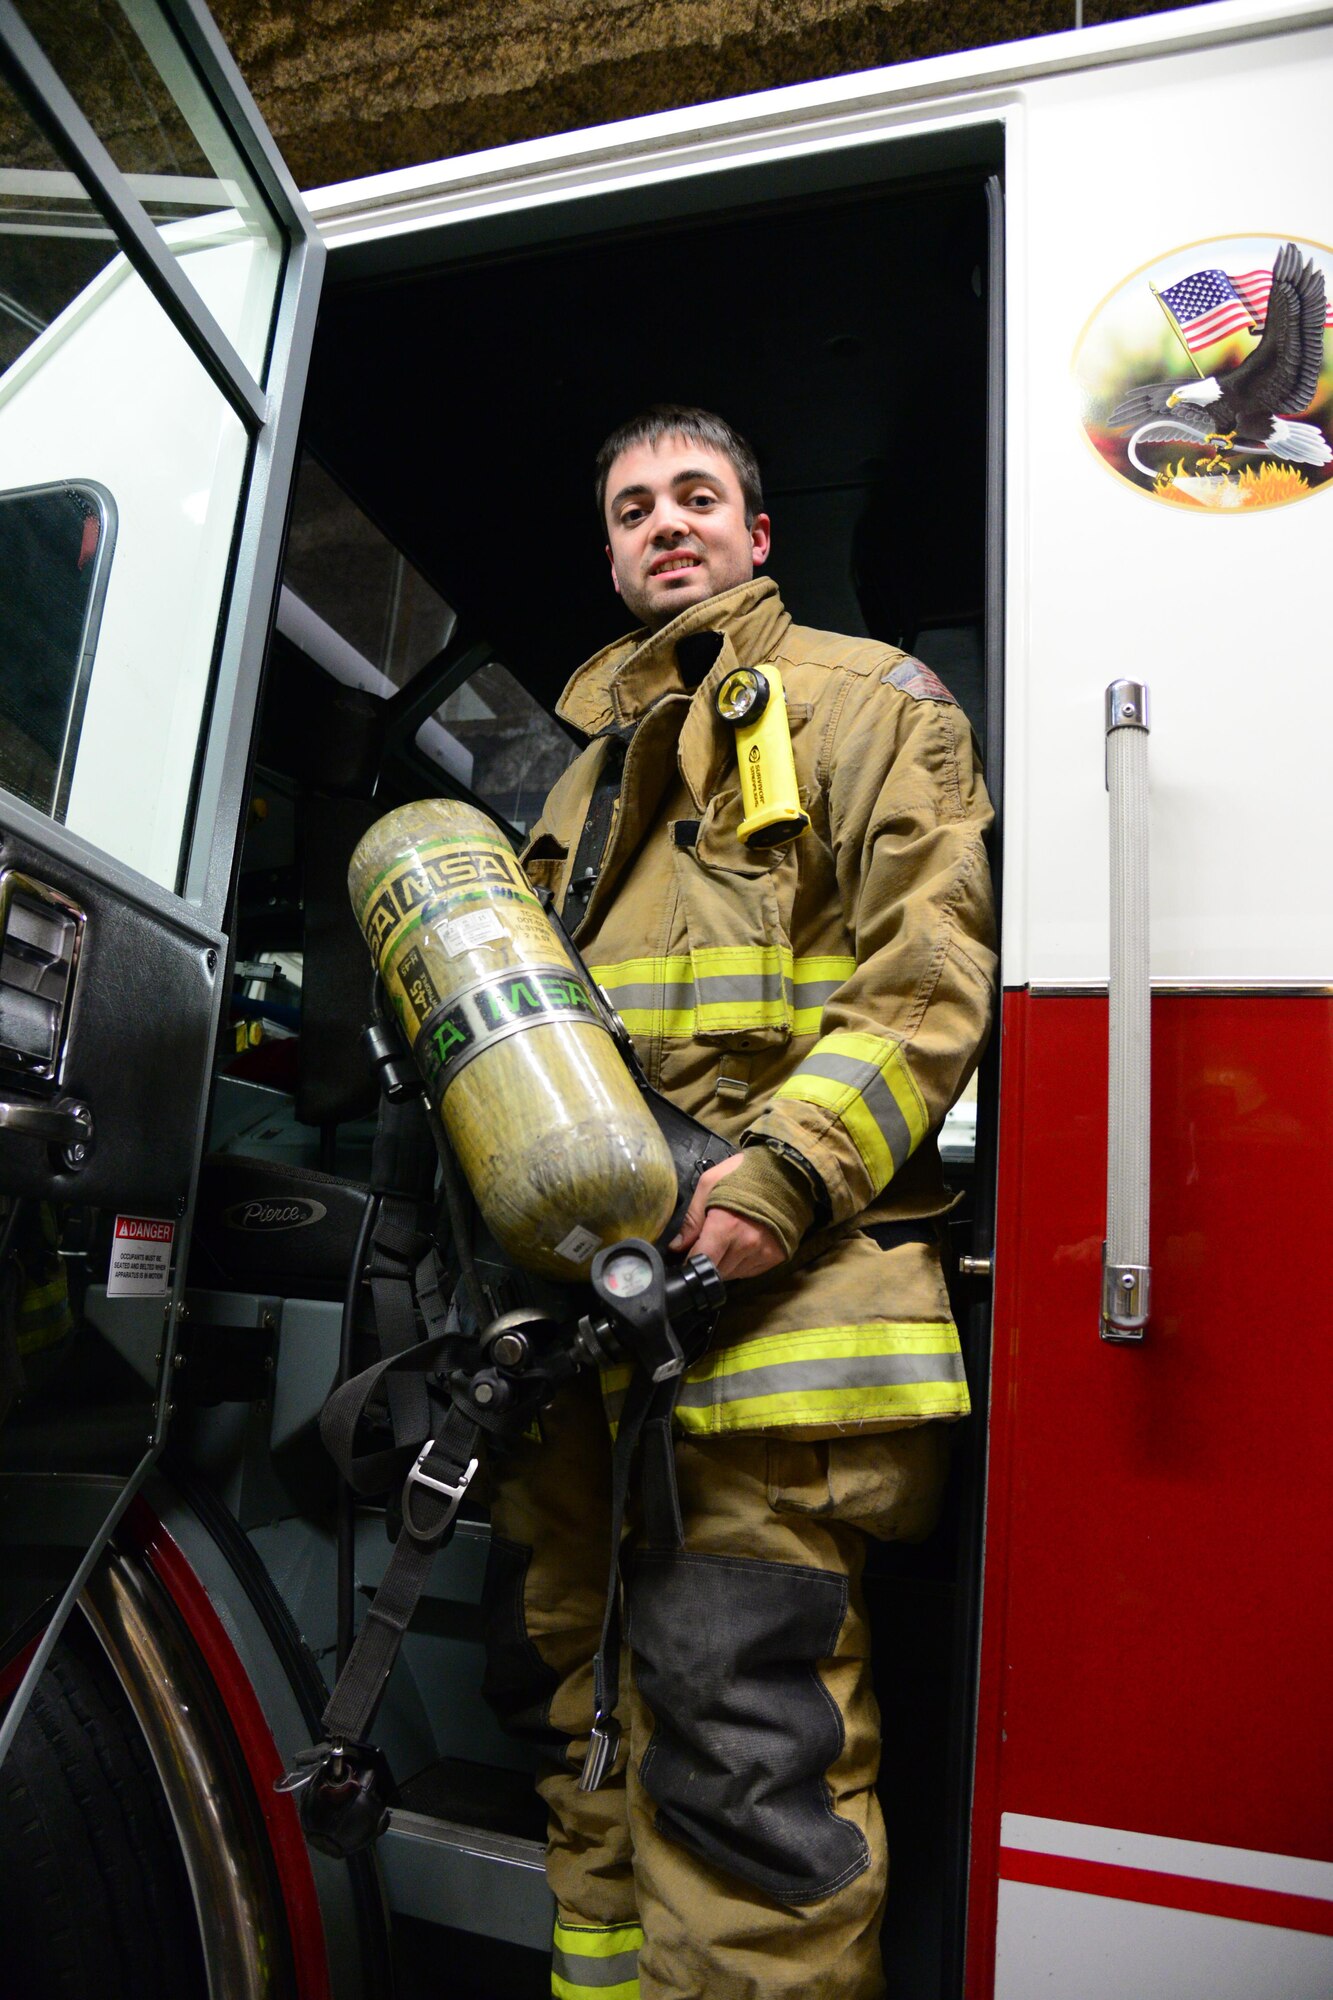 1st Lt. Anthony Perkins, 490th Missile Squadron intercontinental ballistic missile combat crew commander, poses for a photo in his firefighter gear Nov. 8, 2016, at Great Falls Gore Hill Volunteer Fire Department, Great Falls, Mont. Perkins recently received the Military Outstanding Volunteer Service Medal, which is awarded to members of the Armed Forces who perform outstanding volunteer community service that has a direct impact on the wellness of the community. (U.S. Air Force photo/Airman 1st Class Magen M. Reeves)